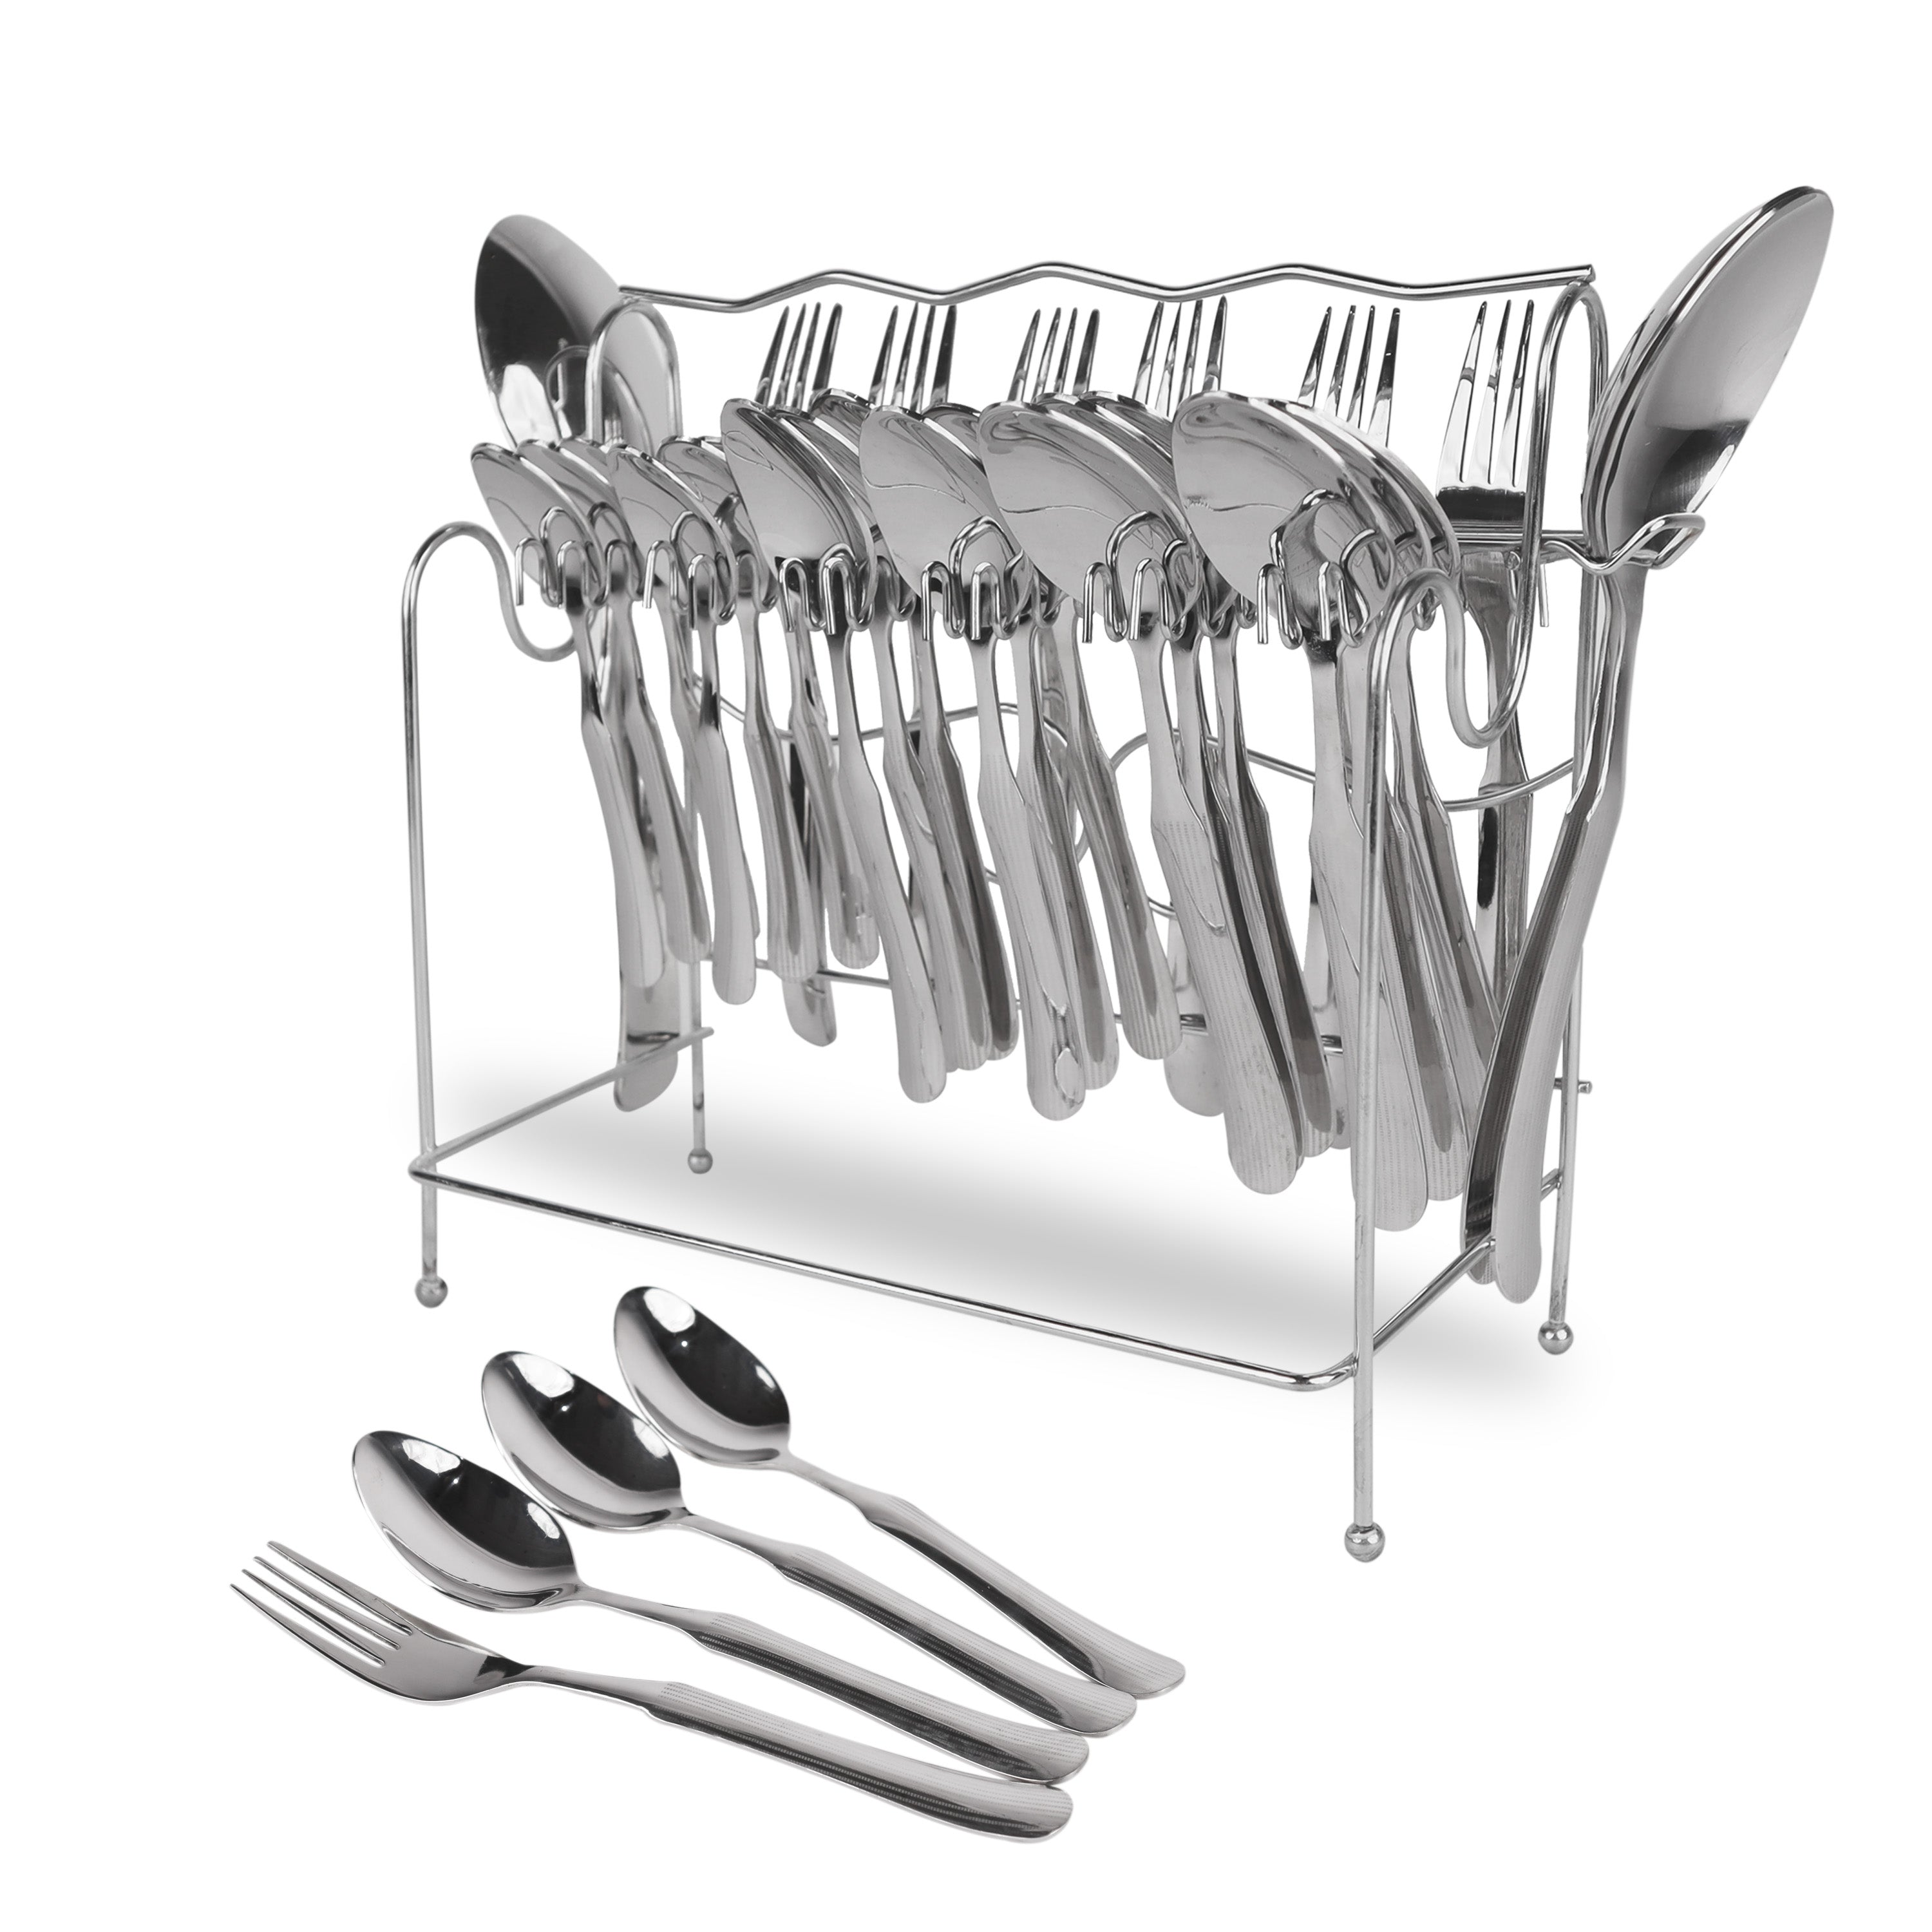 Chef 29 Pcs Stainless Steel Cutlery Set Special Edition Food Grade 304 Series/table spoons and fork